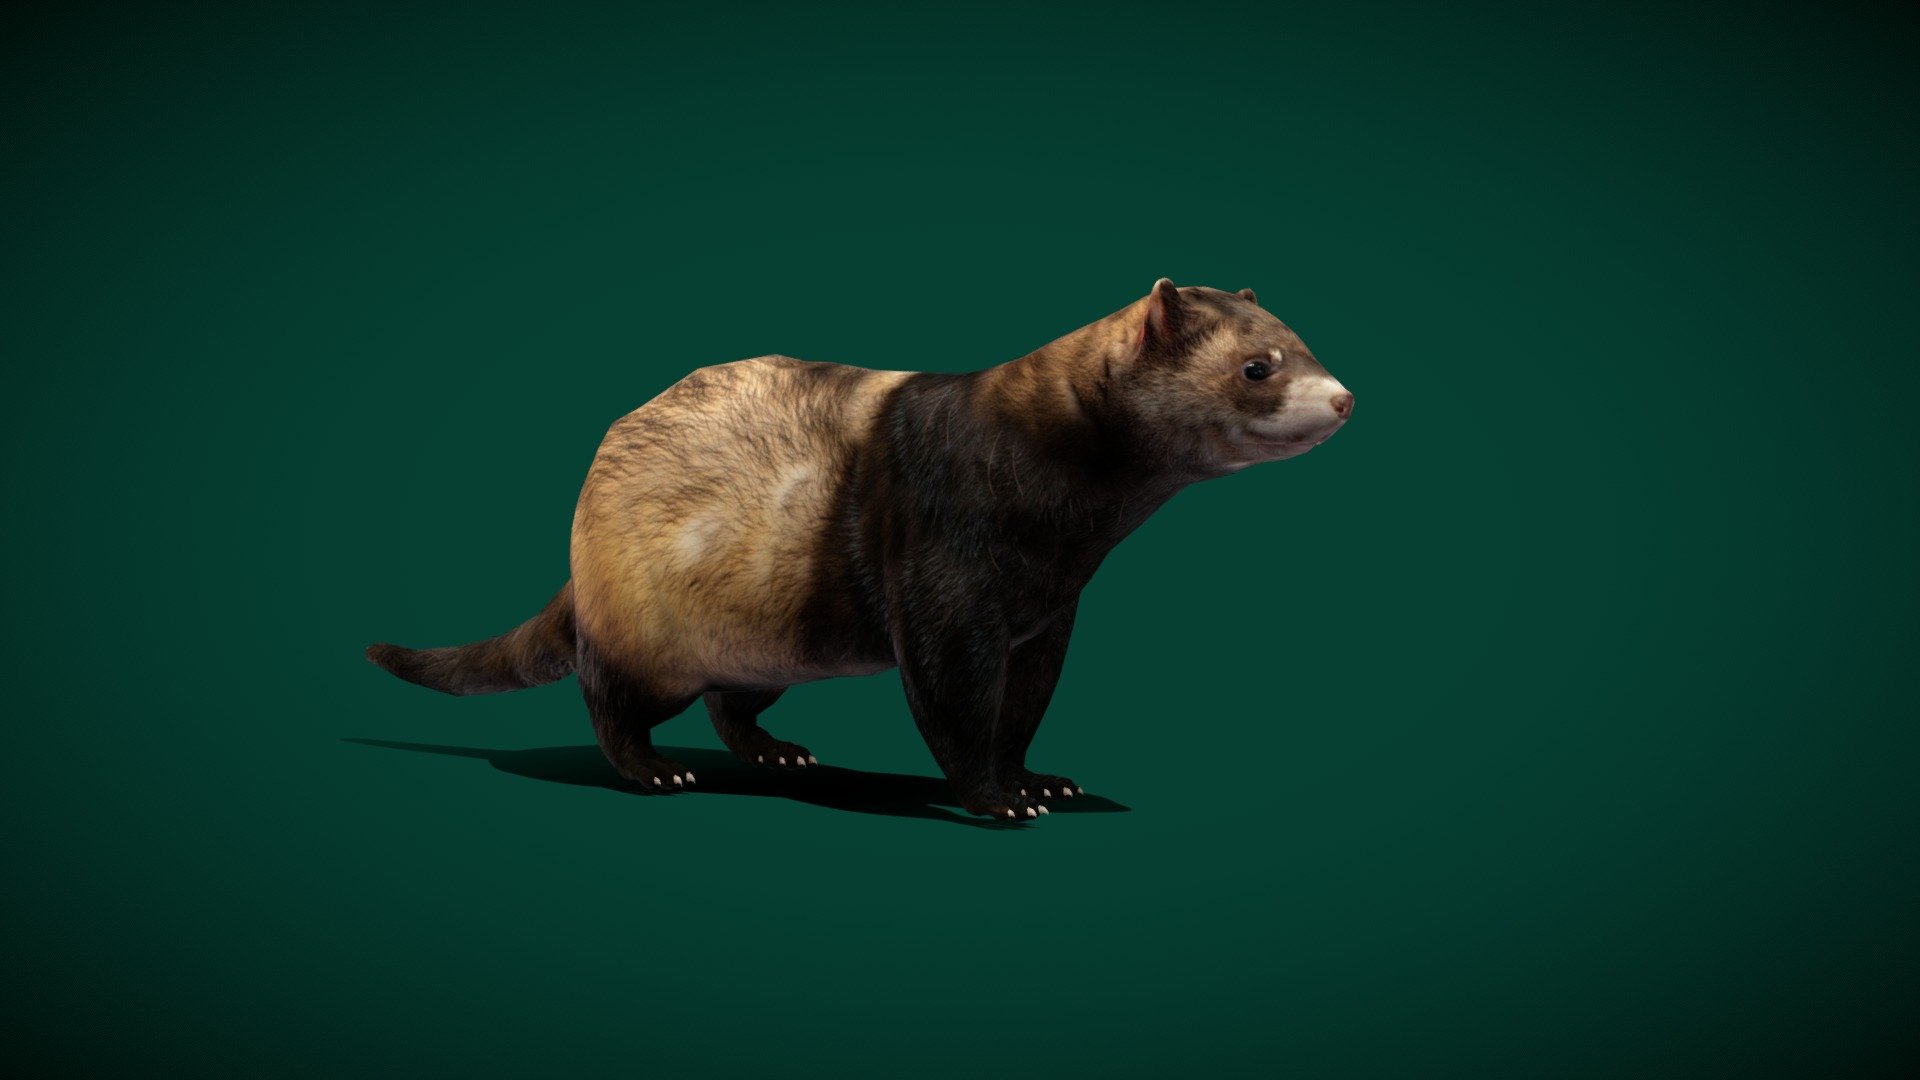 European polecat( black polecat, forest polecat ) common polecat

Mustela putorius Animal Mammal(weasel-like mammal)Tüskevár Foundation to Protect Wild and Exotic Animals in Taksony, Hungary

1 Draw Calls

LowPoly

Game Ready Asset

Subdivision Surface Ready

12- Animations

4K PBR Textures Material

Unreal FBX (Unreal 4,5 Plus)

Unity FBX

Blend File 3.6.5 LTS

USDZ File (AR Ready). Real Scale Dimension (Xcode ,Reality Composer, Keynote Ready)

Textures Files

GLB File (Unreal 5.1 Plus Native Support)


Gltf File ( Spark AR, Lens Studio(SnapChat) , Effector(Tiktok) , Spline, Play Canvas,Omiverse ) Compatible




Triangles -7600   



Faces -3834

Edges -7650

Vertices -3821

Diffuse, Metallic, Roughness , Normal Map ,Specular Map,AO,
The European-polecat, also known as the common polecat, black polecat and forest polecat, is a mustelid species native to western Eurasia and North Africa. It is of a generally dark brown colour, with a pale underbelly and a dark mask across the face - European Polecat (LowPoly) - Buy Royalty Free 3D model by Nyilonelycompany 3d model